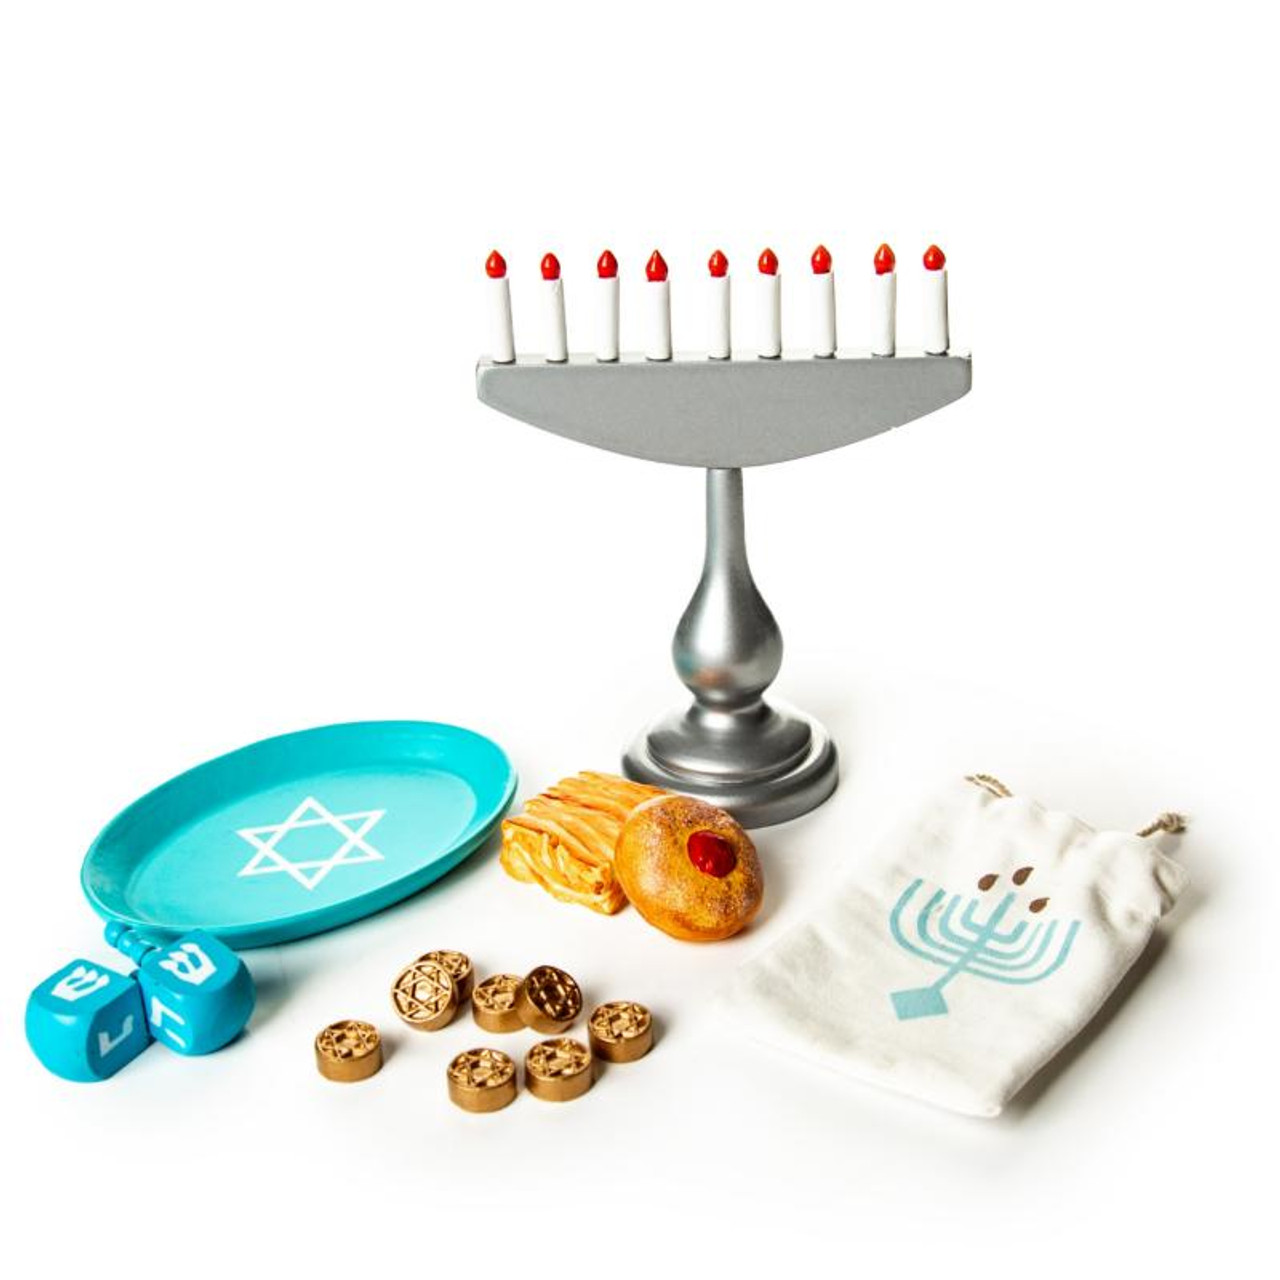 https://cdn11.bigcommerce.com/s-m5vcu70215/images/stencil/1280x1280/products/166/2624/the-queens-treasures-22-pc-hanukkah-play-accessory-and-food-set-accessories-for-18-inch-dolls__73963.1692299475.jpg?c=1